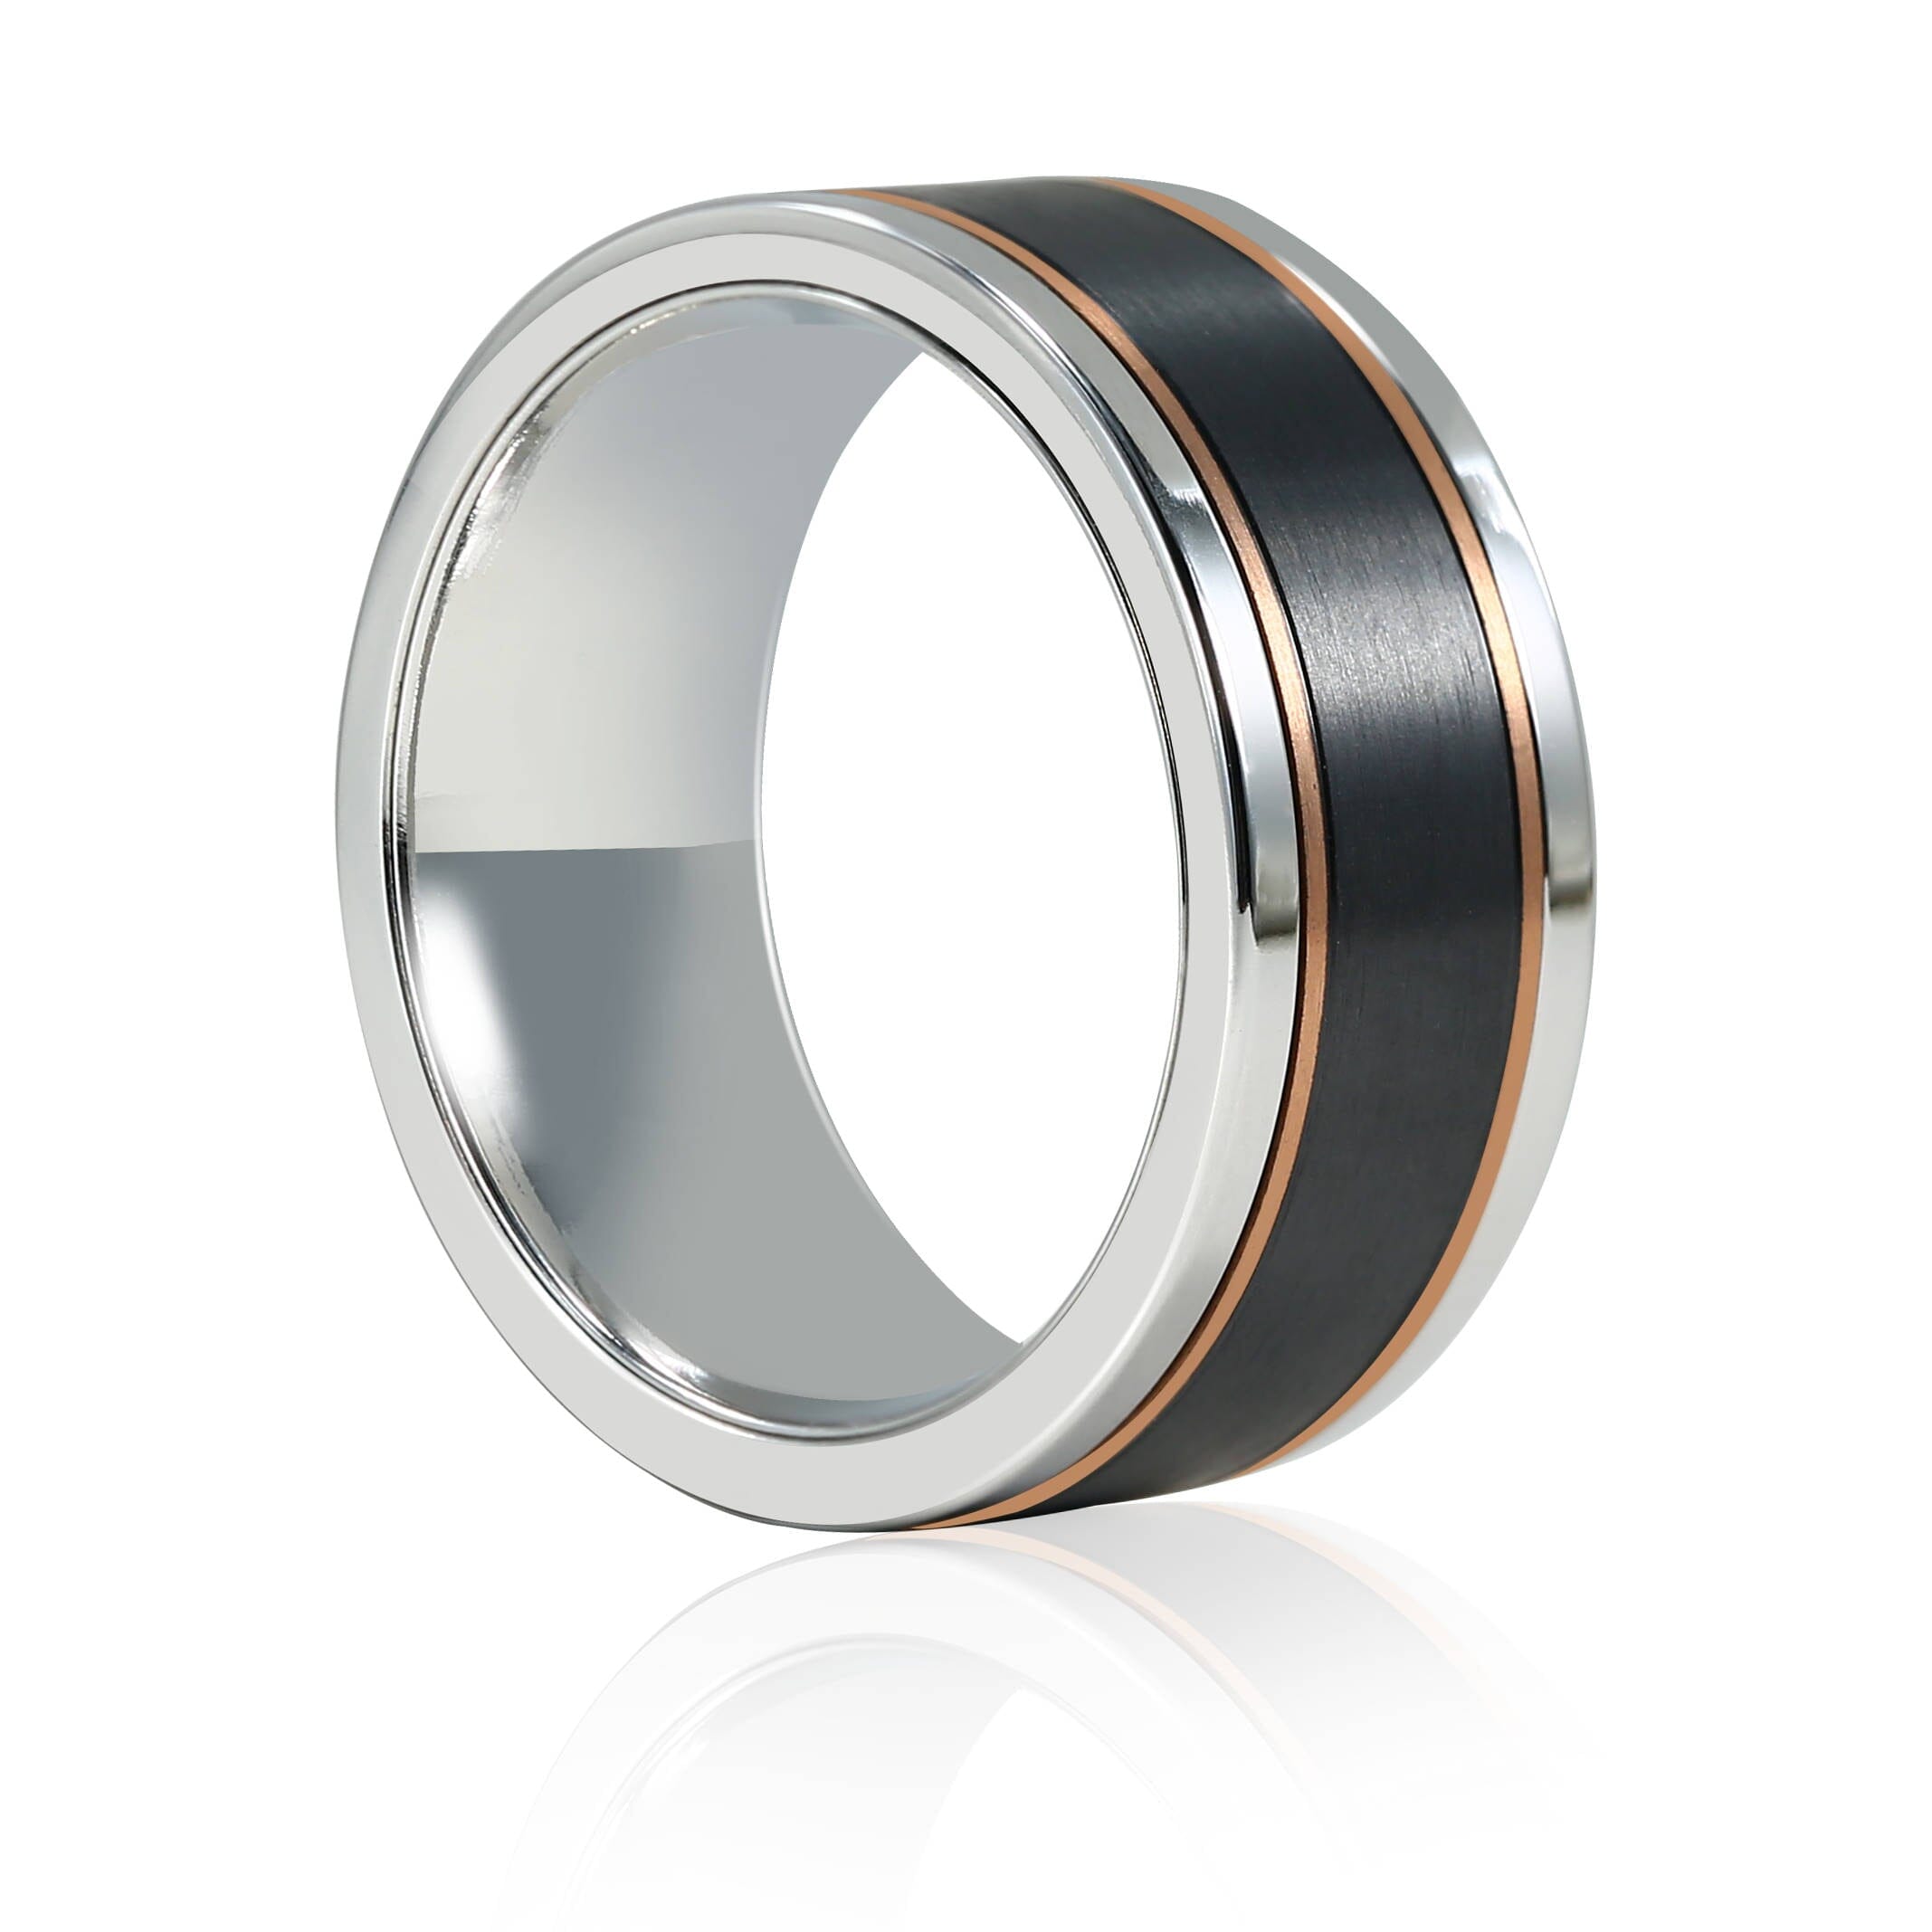 Stanton Made For Men Black Zirconium Ring with Rose and Silver Accents Rings Bevilles 